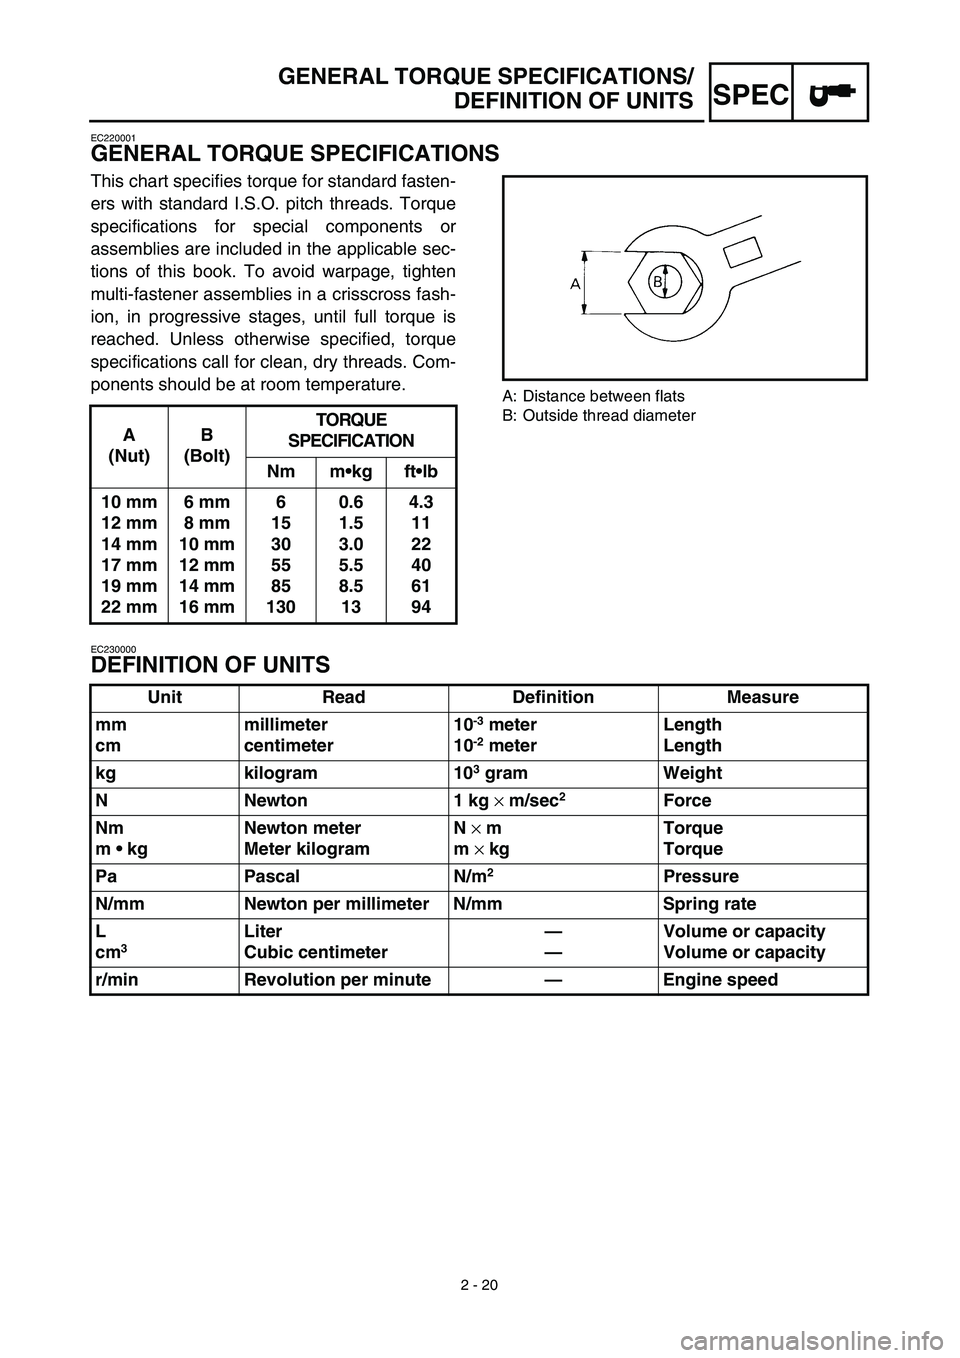 YAMAHA WR 450F 2003  Owners Manual  
2 - 20
SPEC
 
GENERAL TORQUE SPECIFICATIONS/
DEFINITION OF UNITS 
EC220001 
GENERAL TORQUE SPECIFICATIONS 
This chart specifies torque for standard fasten-
ers with standard I.S.O. pitch threads. To